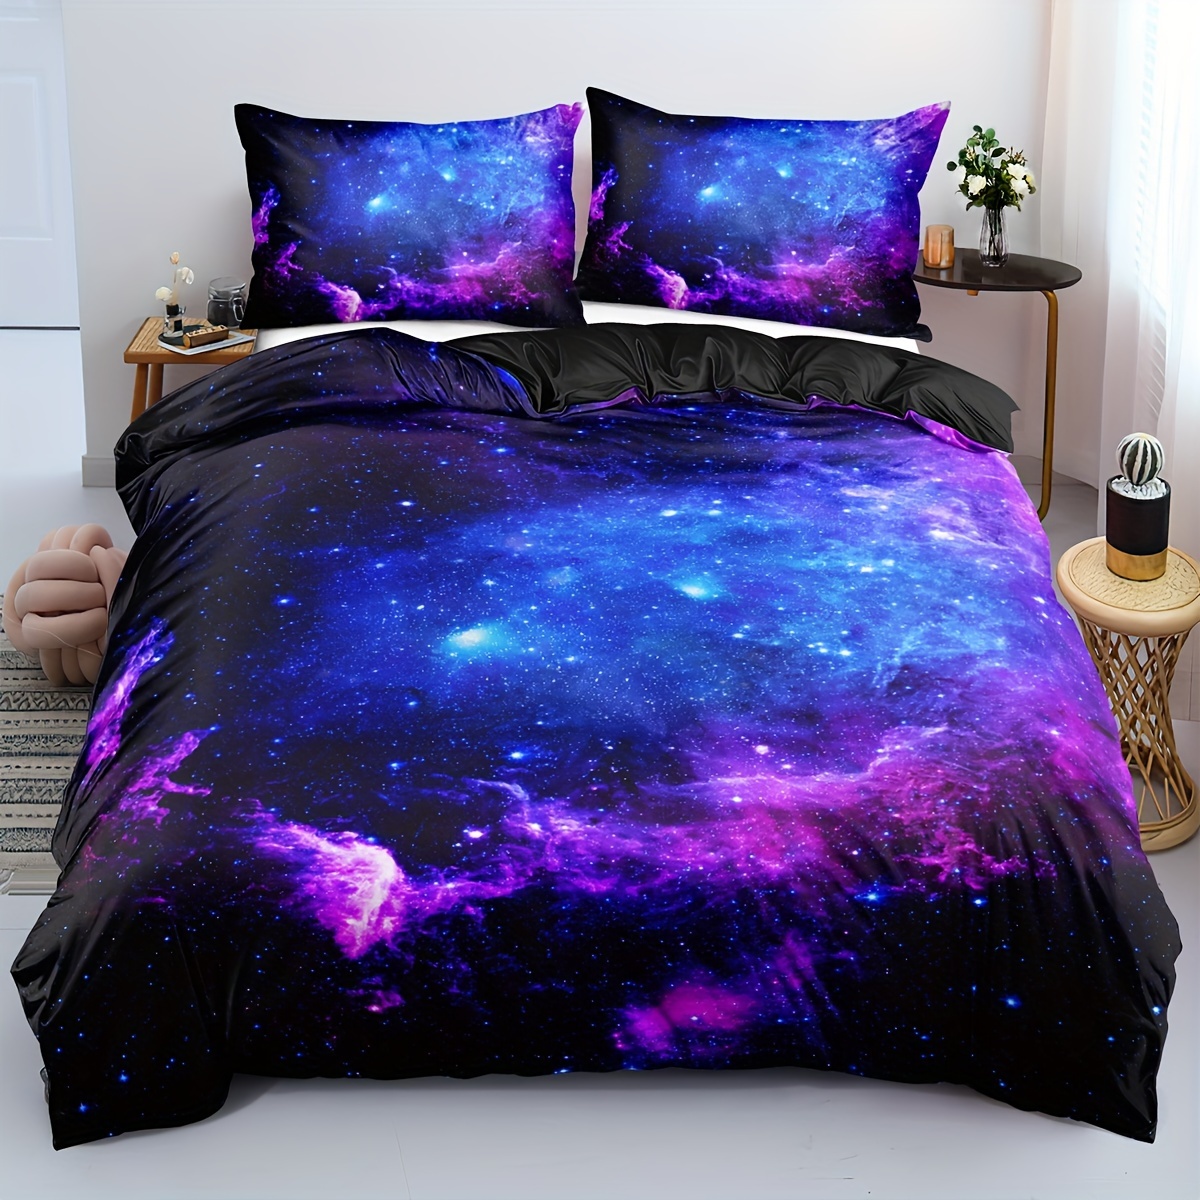 

2/3pcs Duvet Cover Set, Soft And Comfortable, Galaxy Bedding Set, Purple Bedding Set, Galaxy Bedding Sets, Dream Bed Set (1*duvet Cover +1/2*pillowcase, Core Not Included)